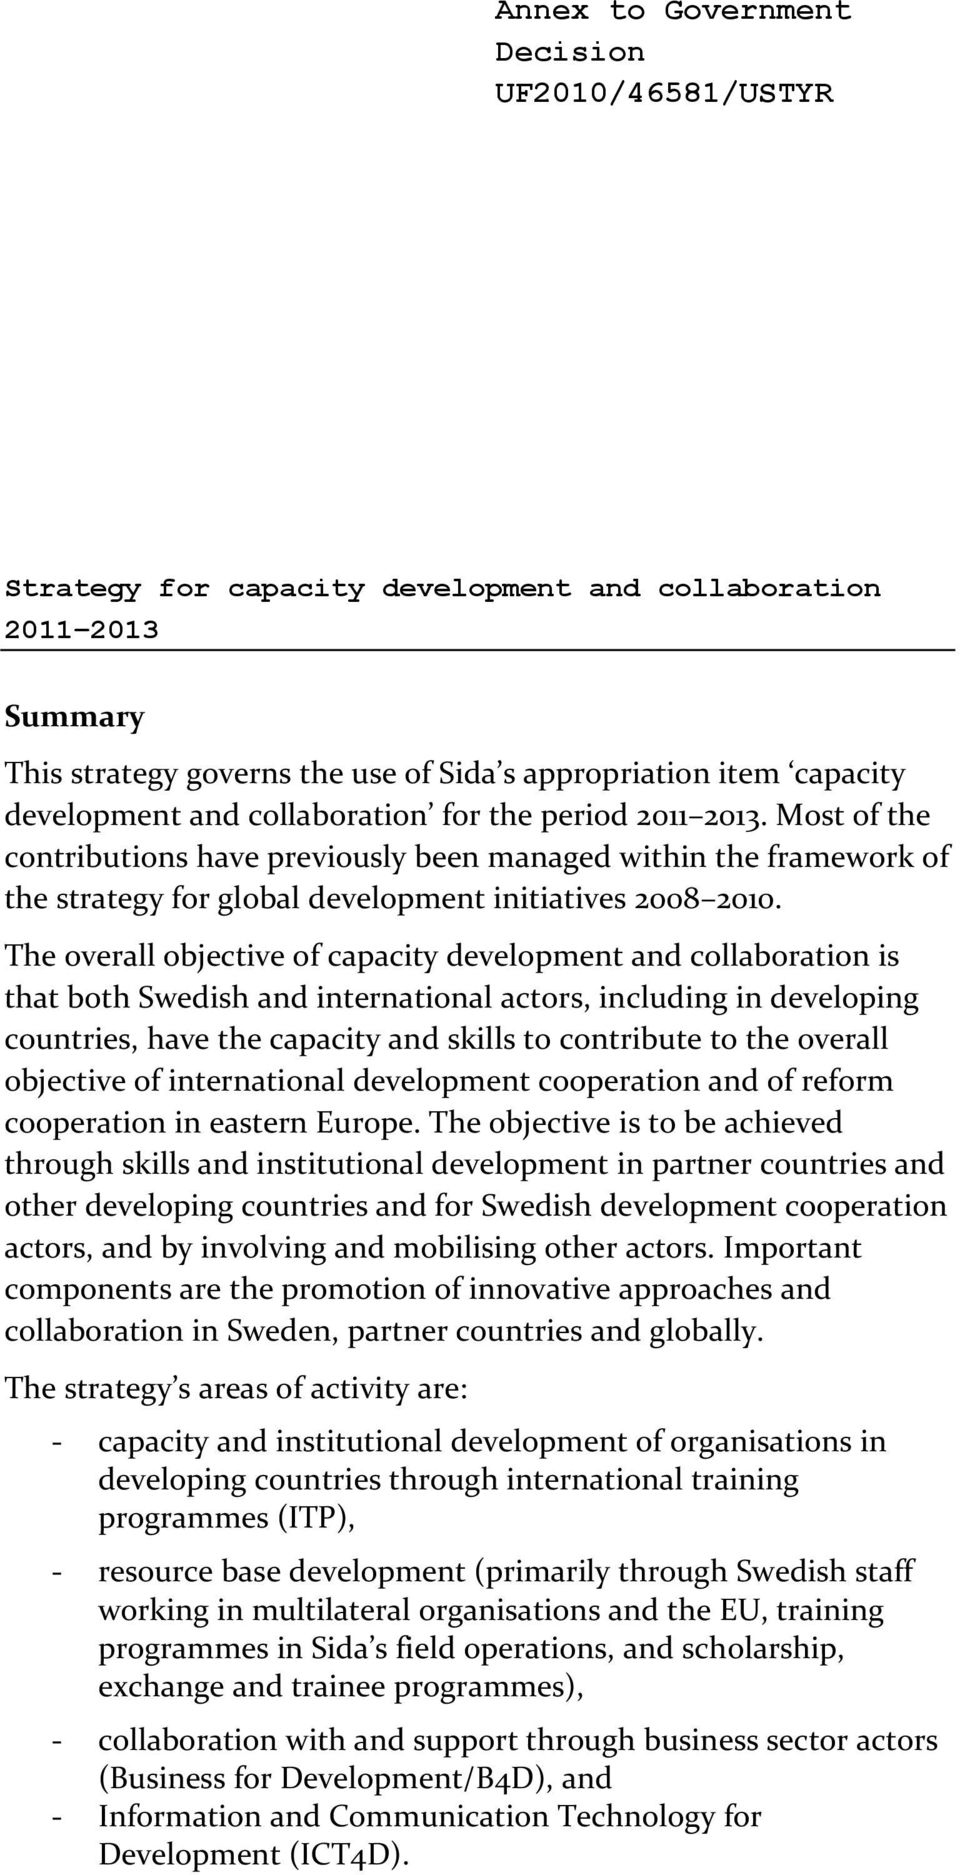 The overall objective of capacity development and collaboration is that both Swedish and international actors, including in developing countries, have the capacity and skills to contribute to the